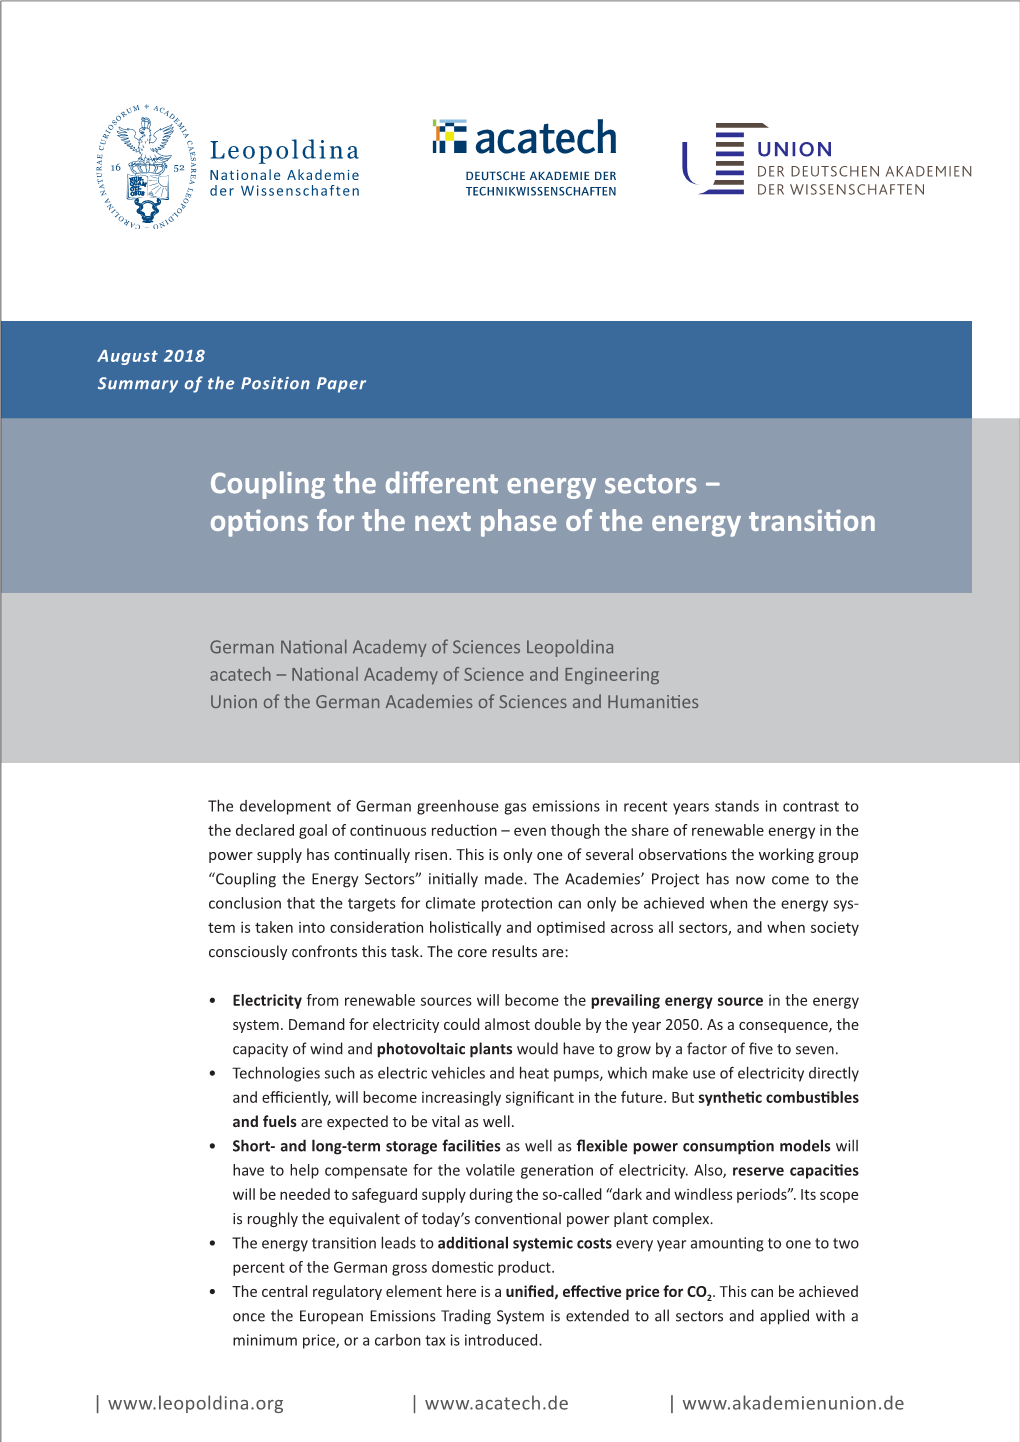 Coupling the Different Energy Sectors − Options for the Next Phase of the Energy Transition